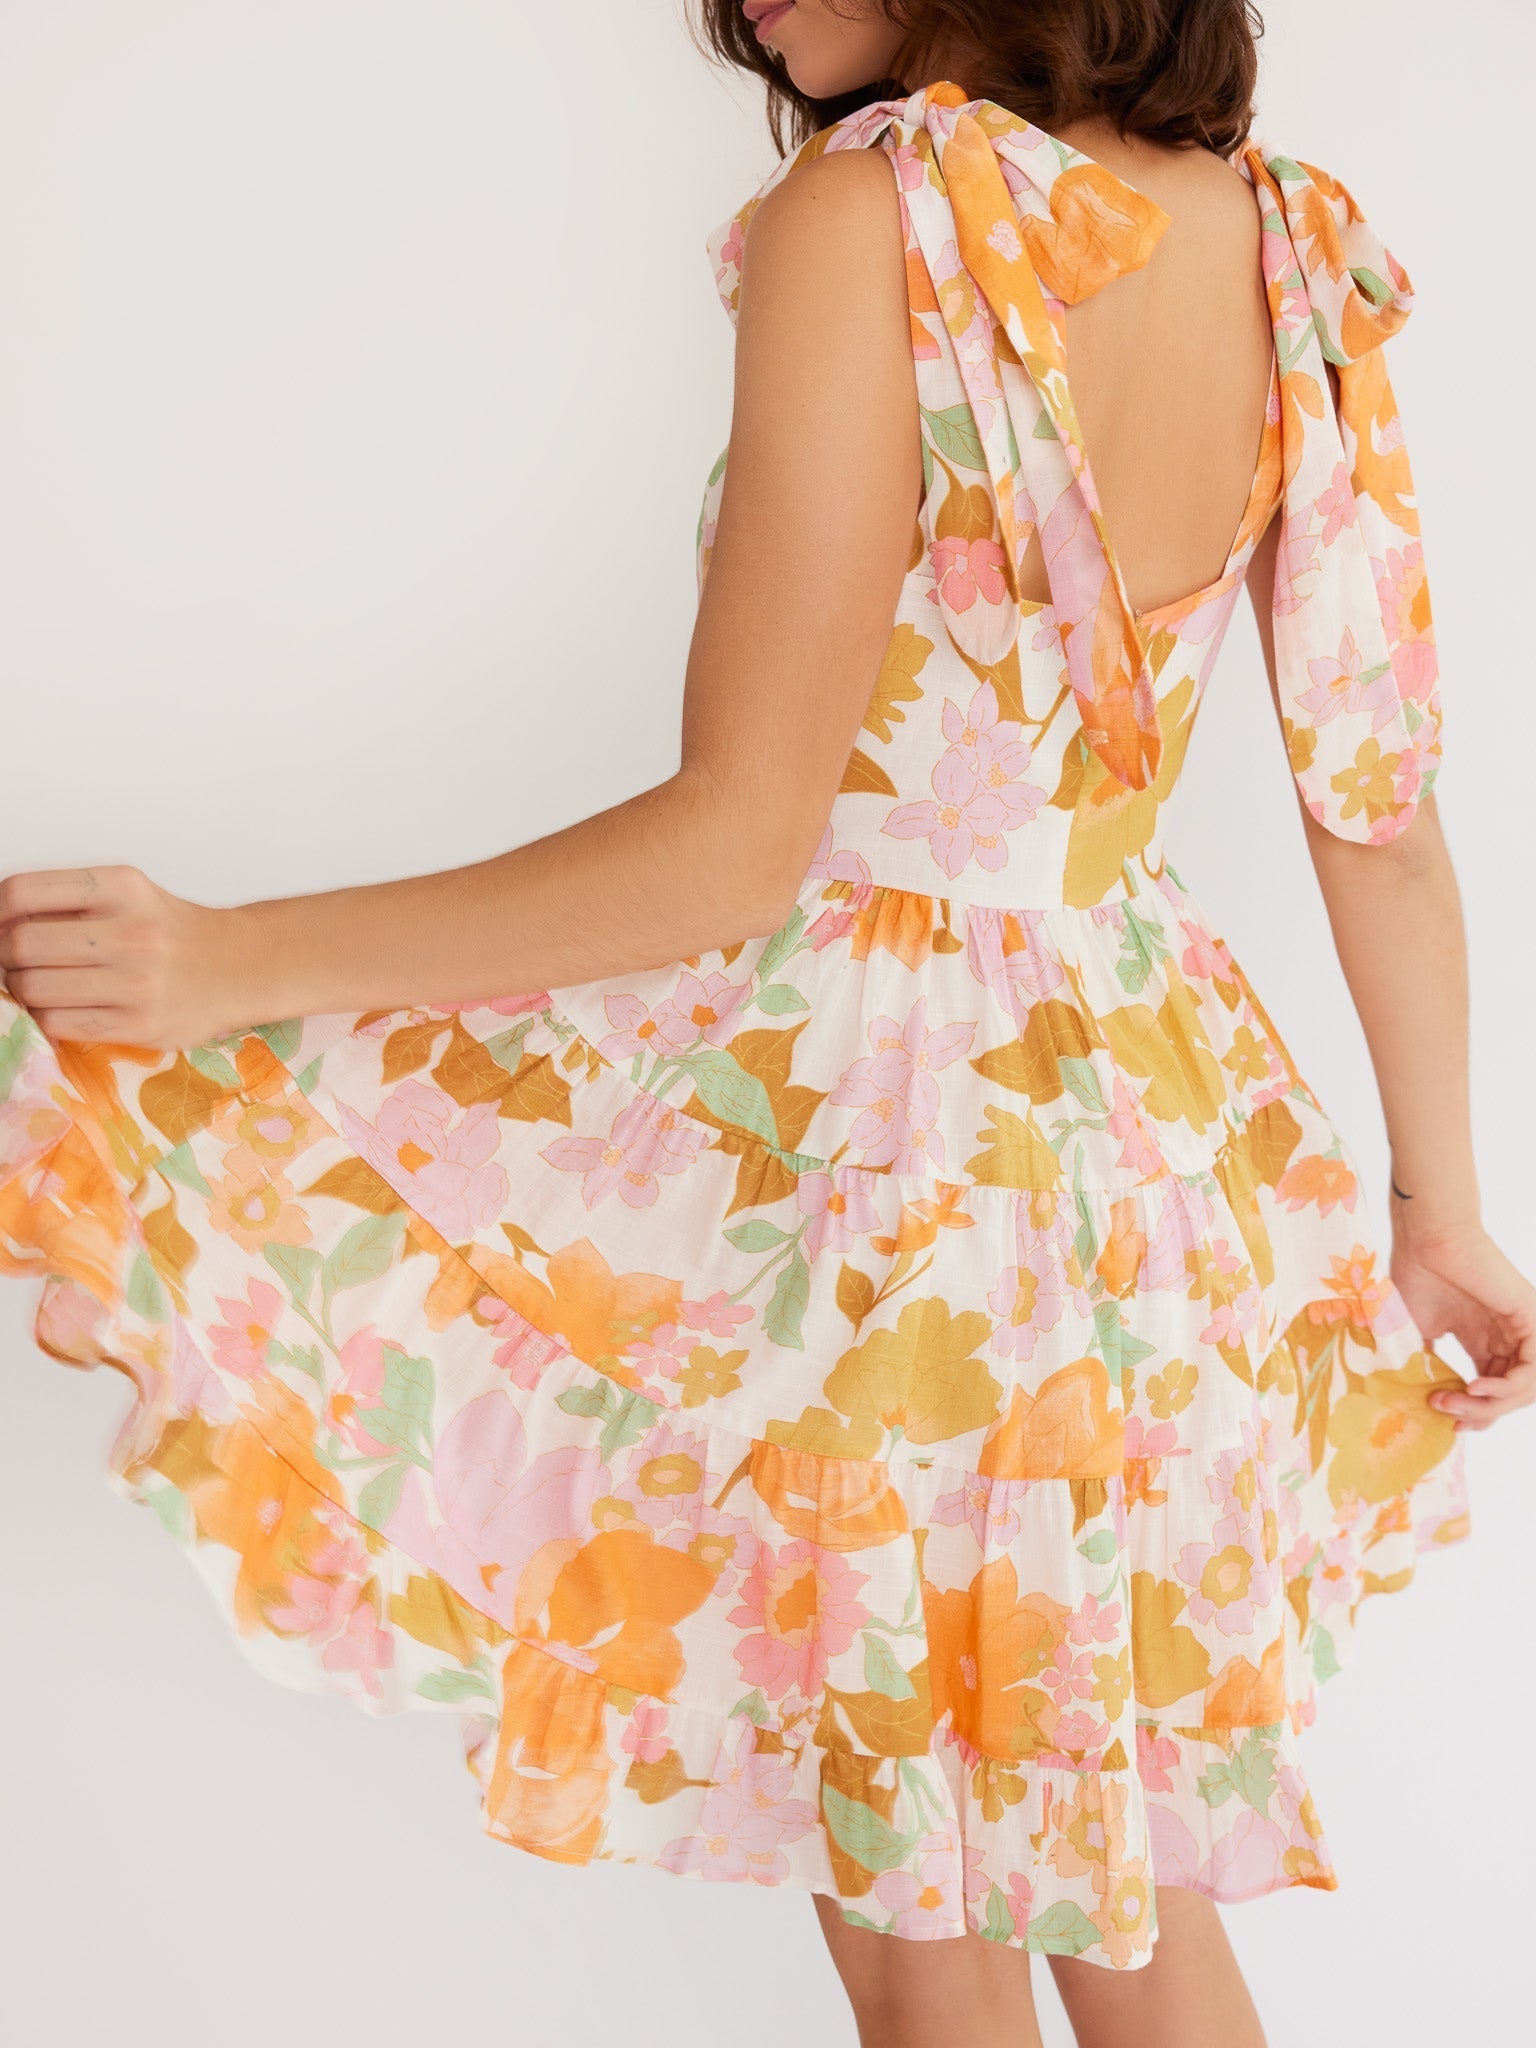 MILLE Clothing Kiara Dress in Harmony Floral